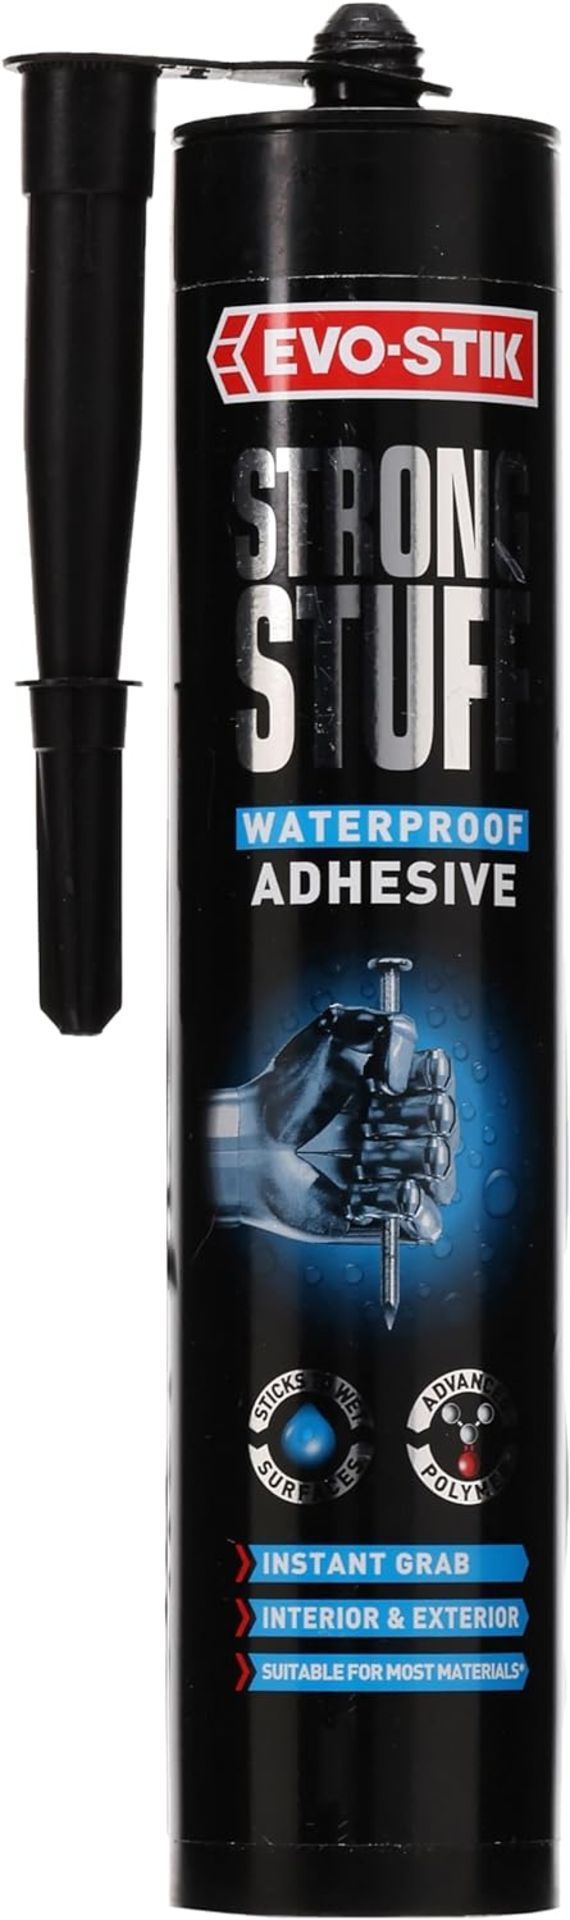 TRADE LOT TO CONTAIN 144x BRAND NEW EVO-STIK Strong Stuff Waterproof Adhesive 290ml. RRP £11.99